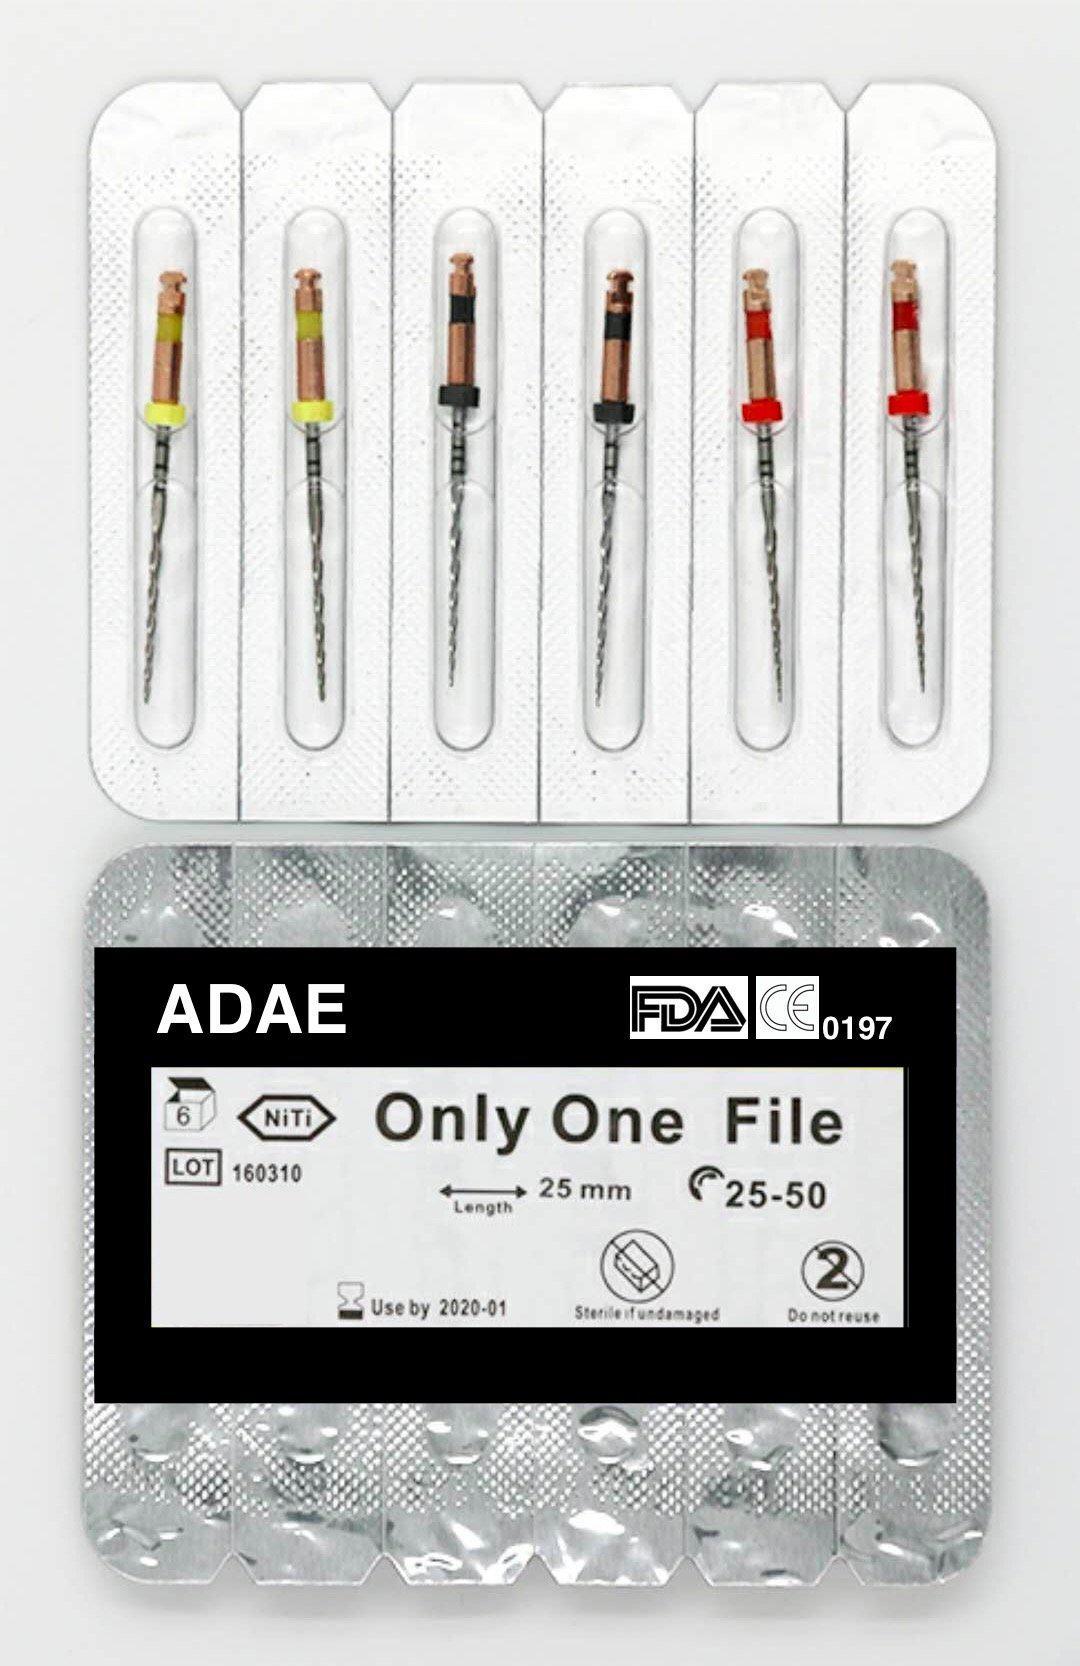 ADAE Only One File - ADAE Dental Online Store